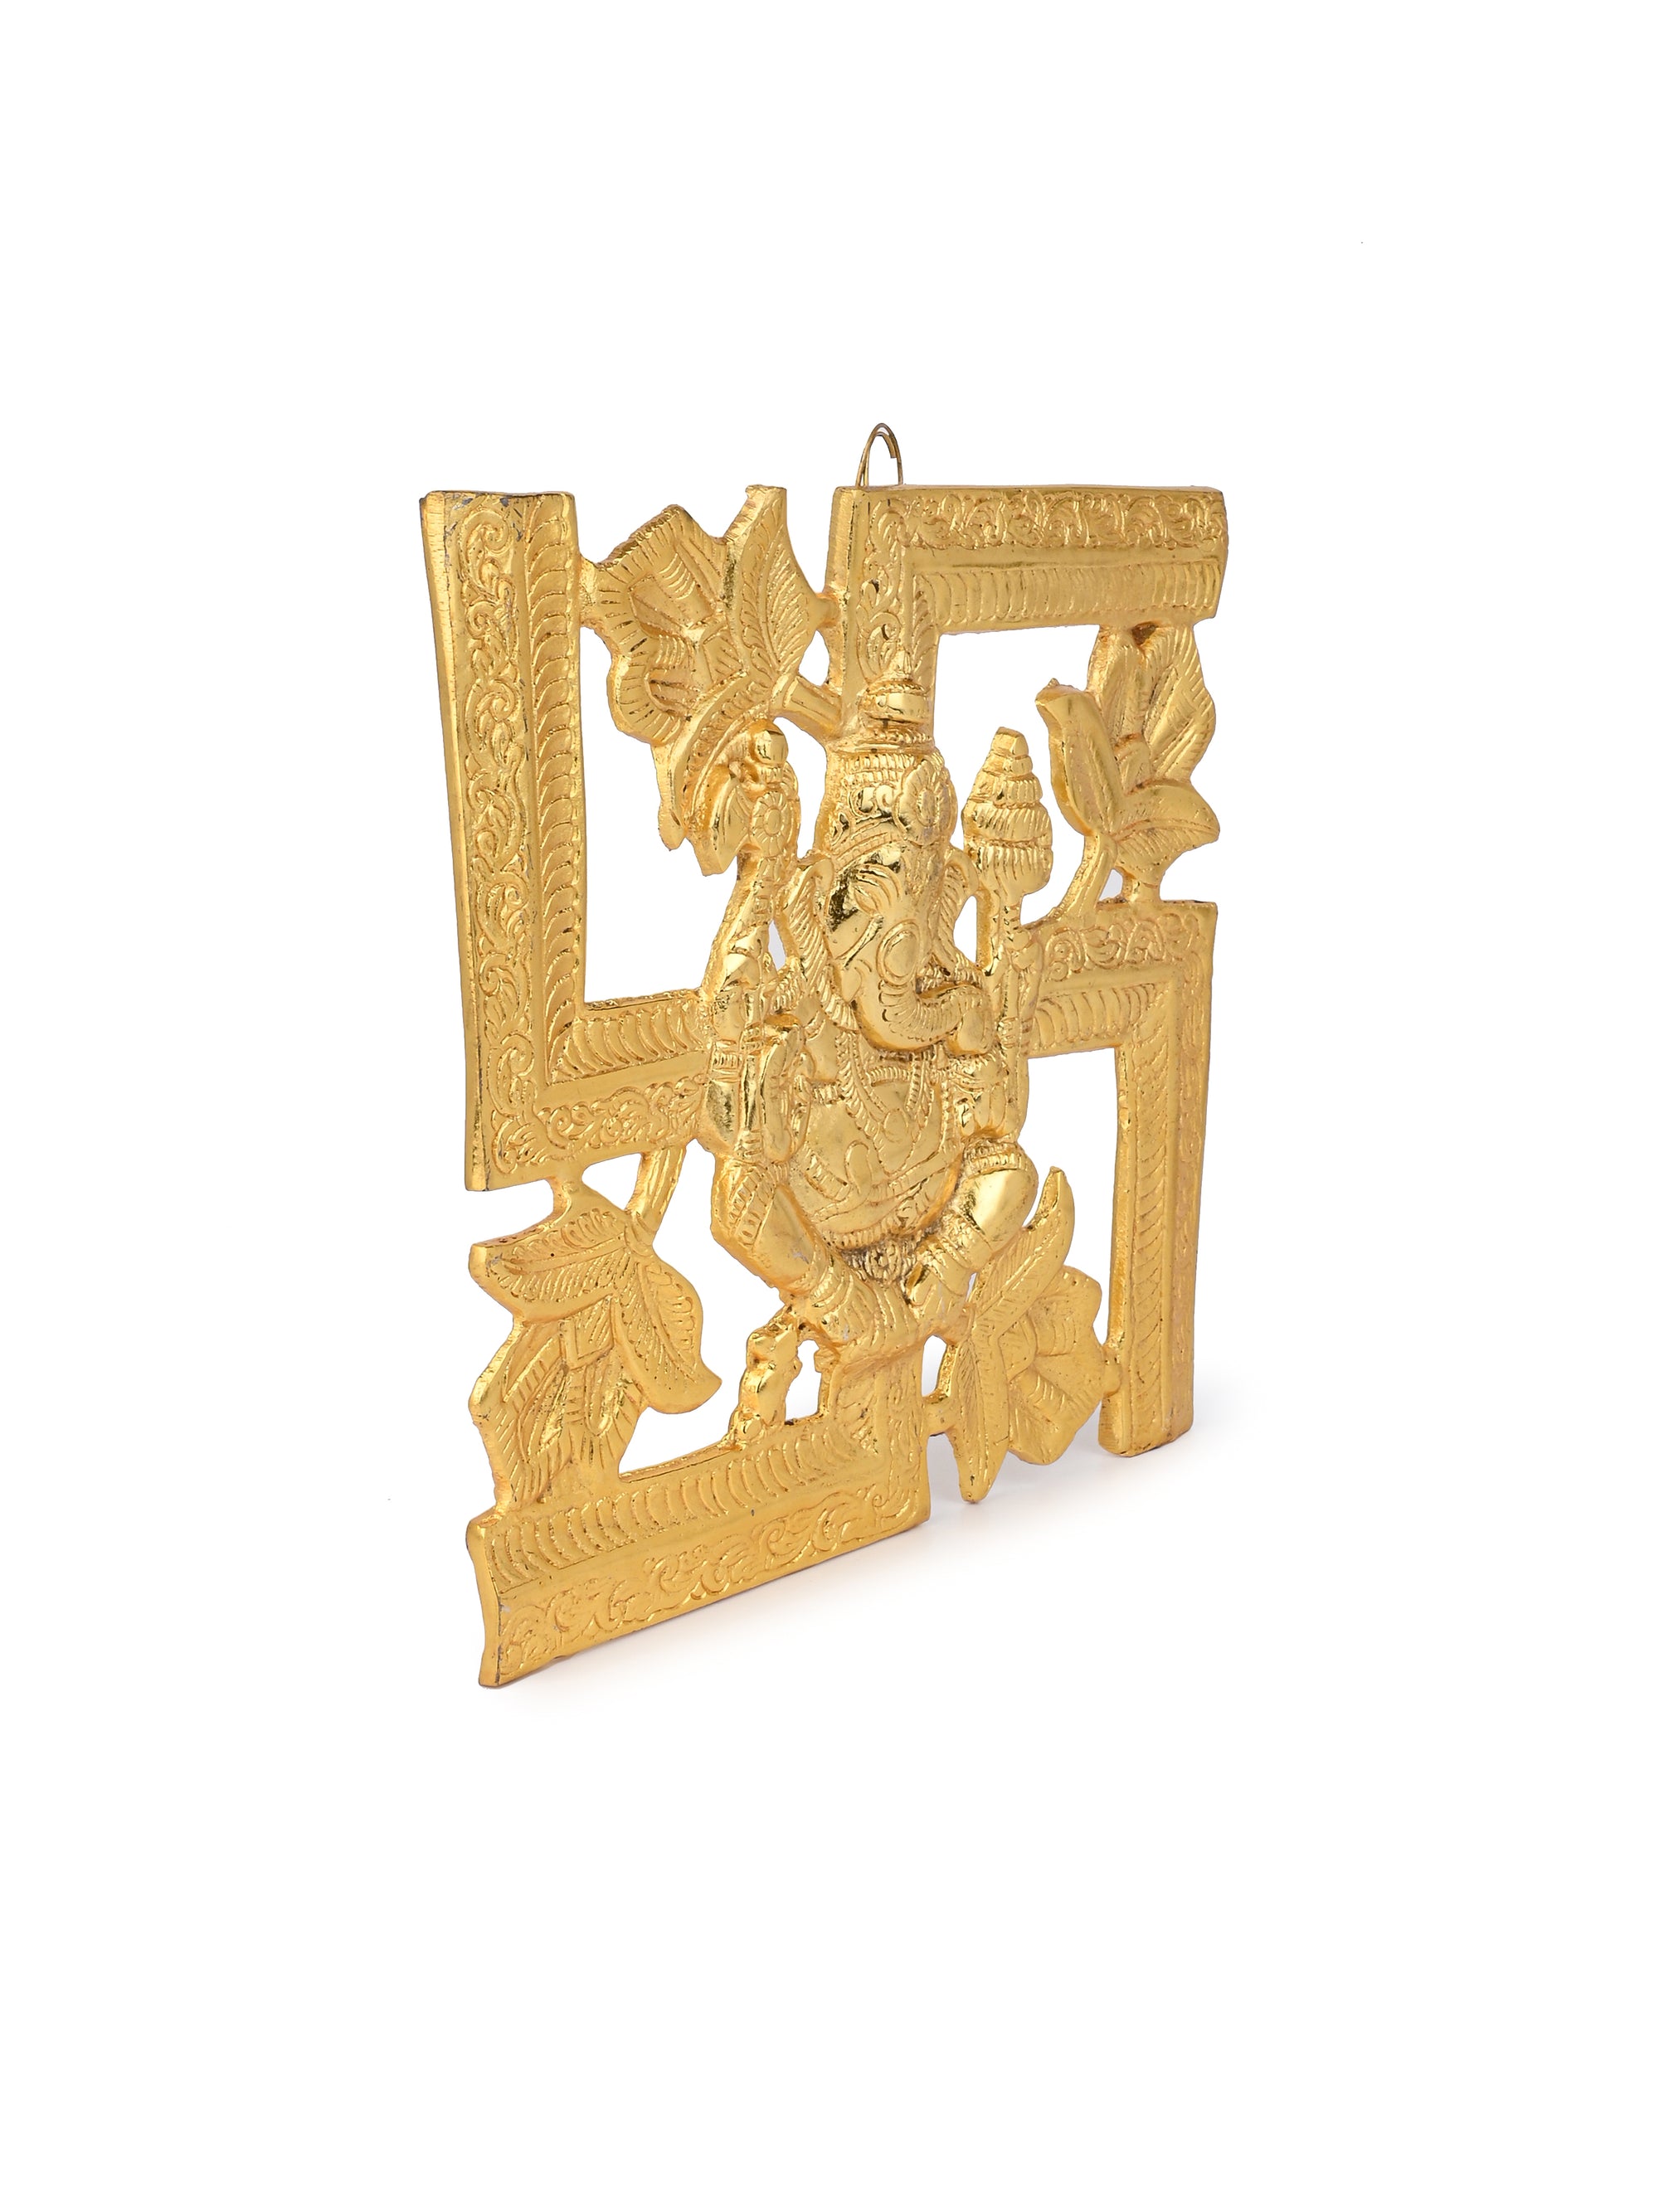 Metal Crafted Golden Swastik Ganesh Hanging Wall Decor - 8 inches